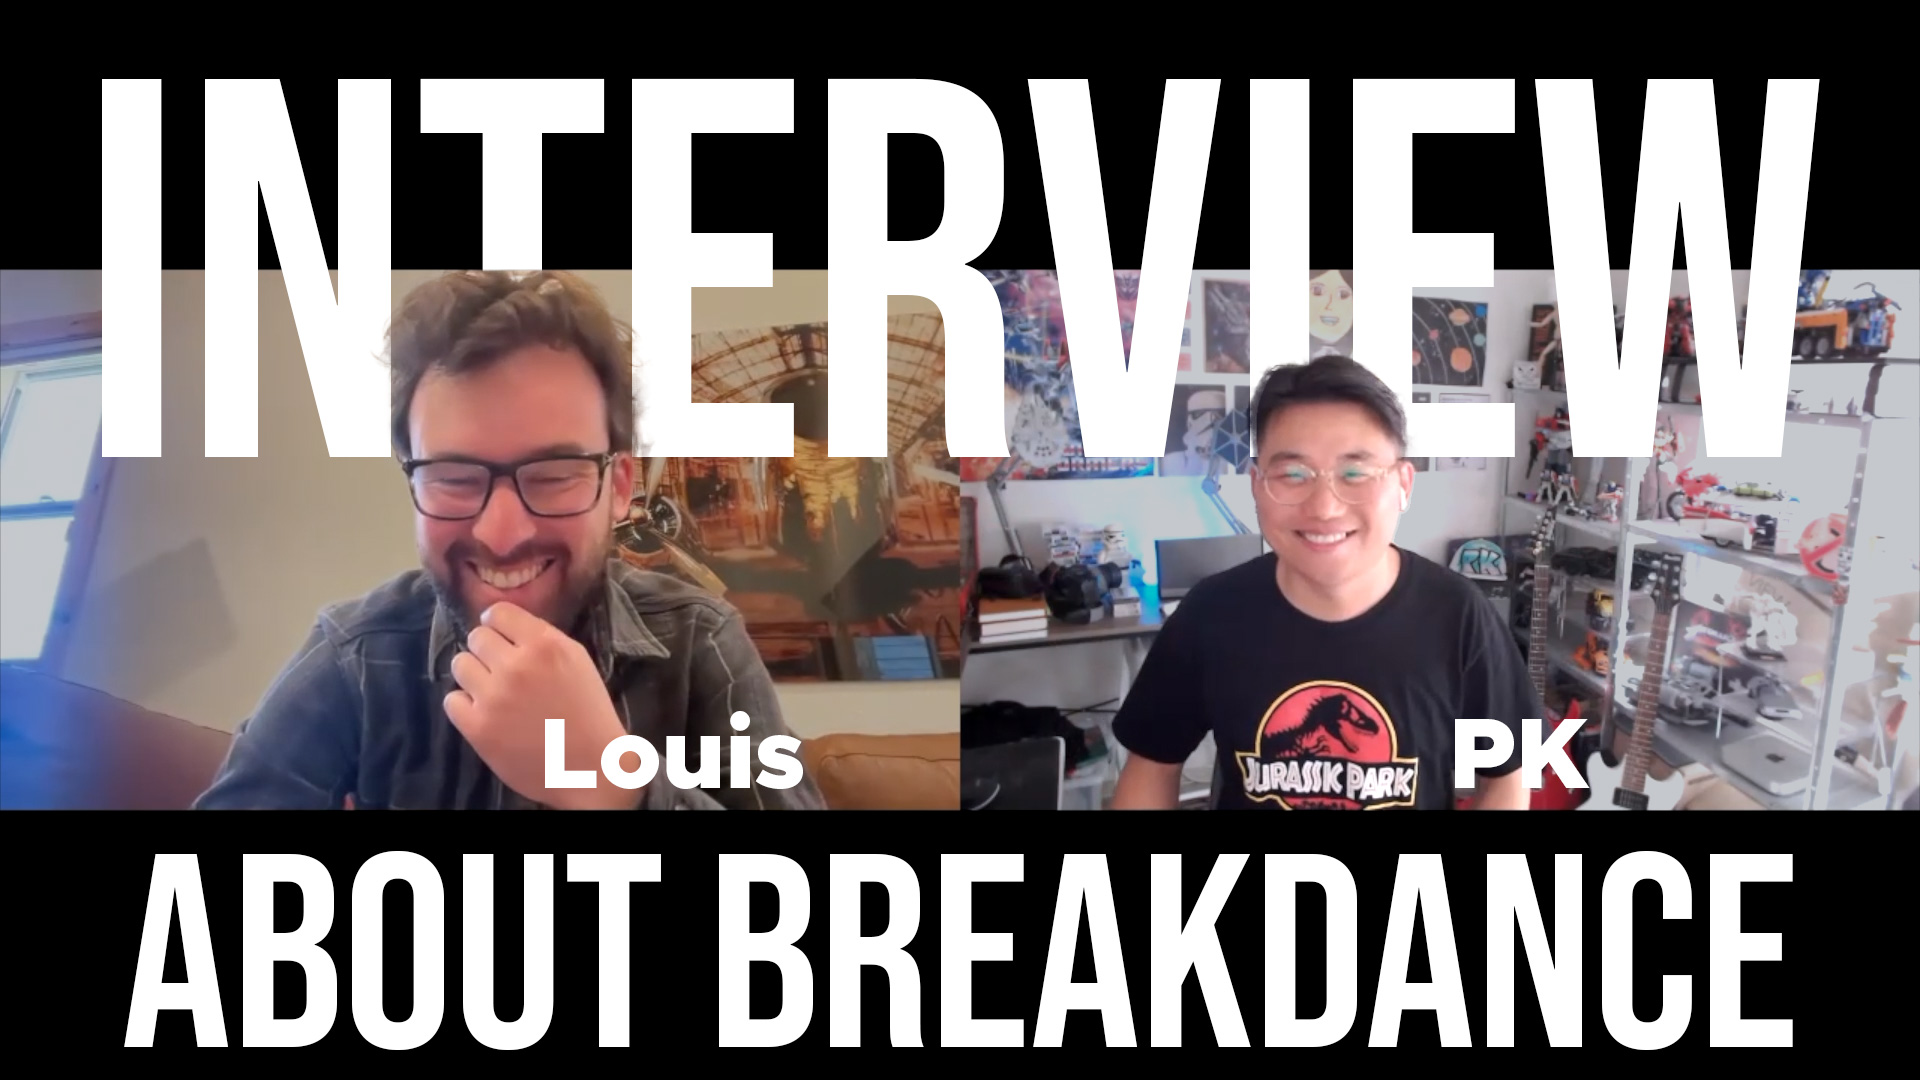 Interview with Louis about Breakdance